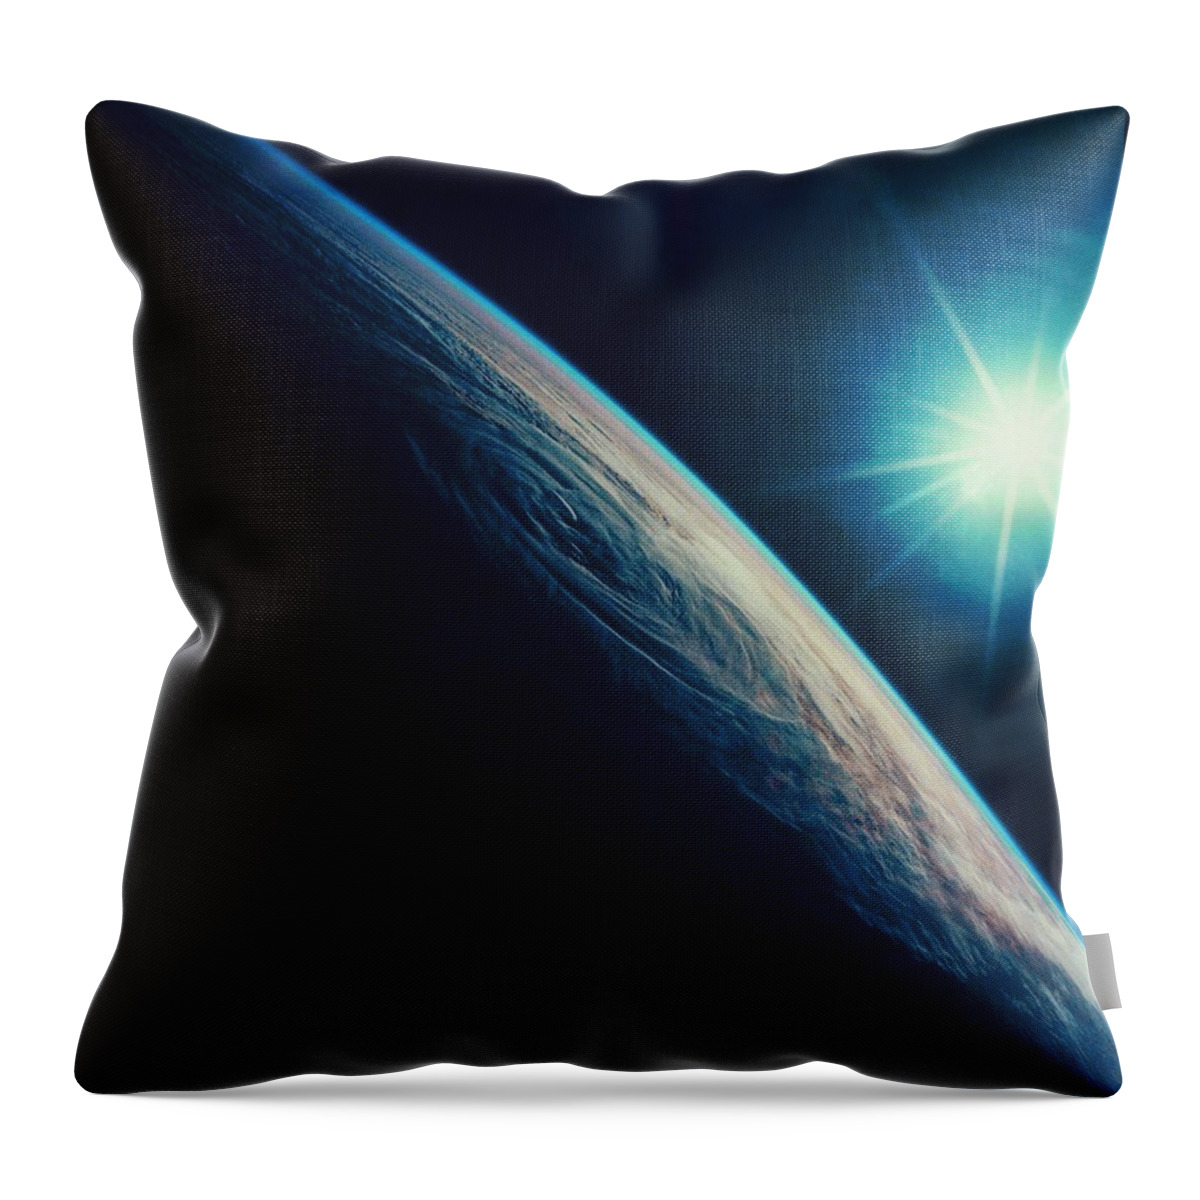 Curve Throw Pillow featuring the photograph Earth Showing A Tropical Storm In The by Digital Vision.